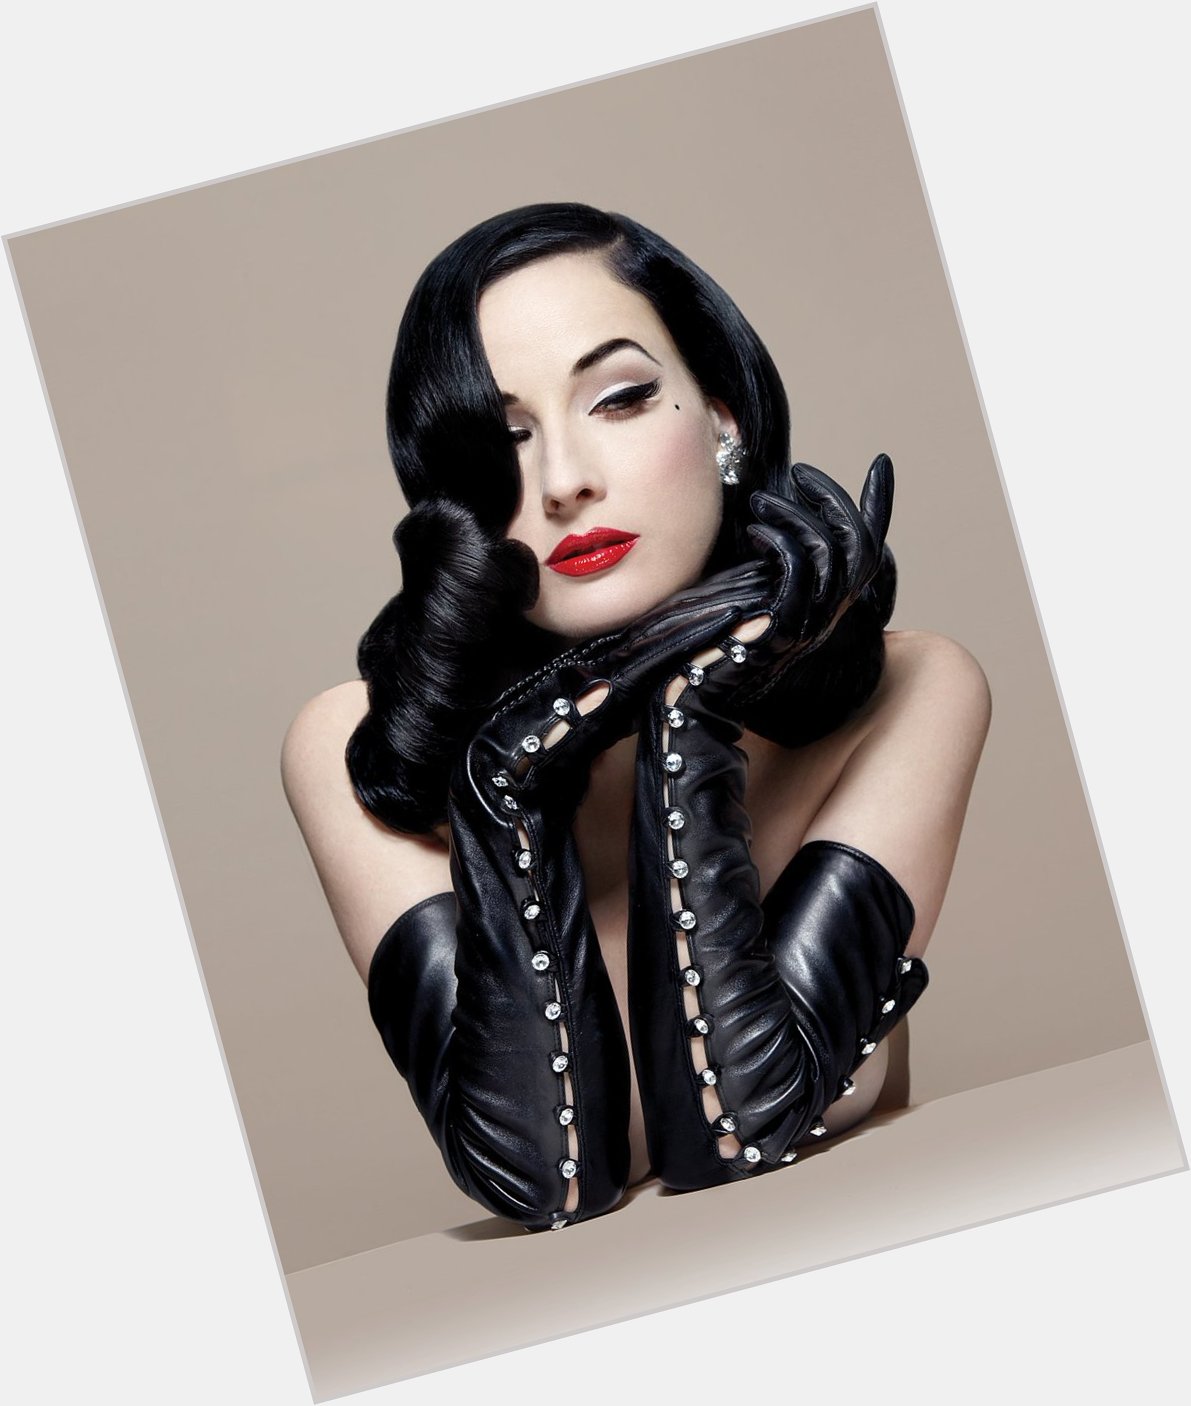 Happy Birthday to the gorgeous Dita Von Teese
The epitome of class and mystique 